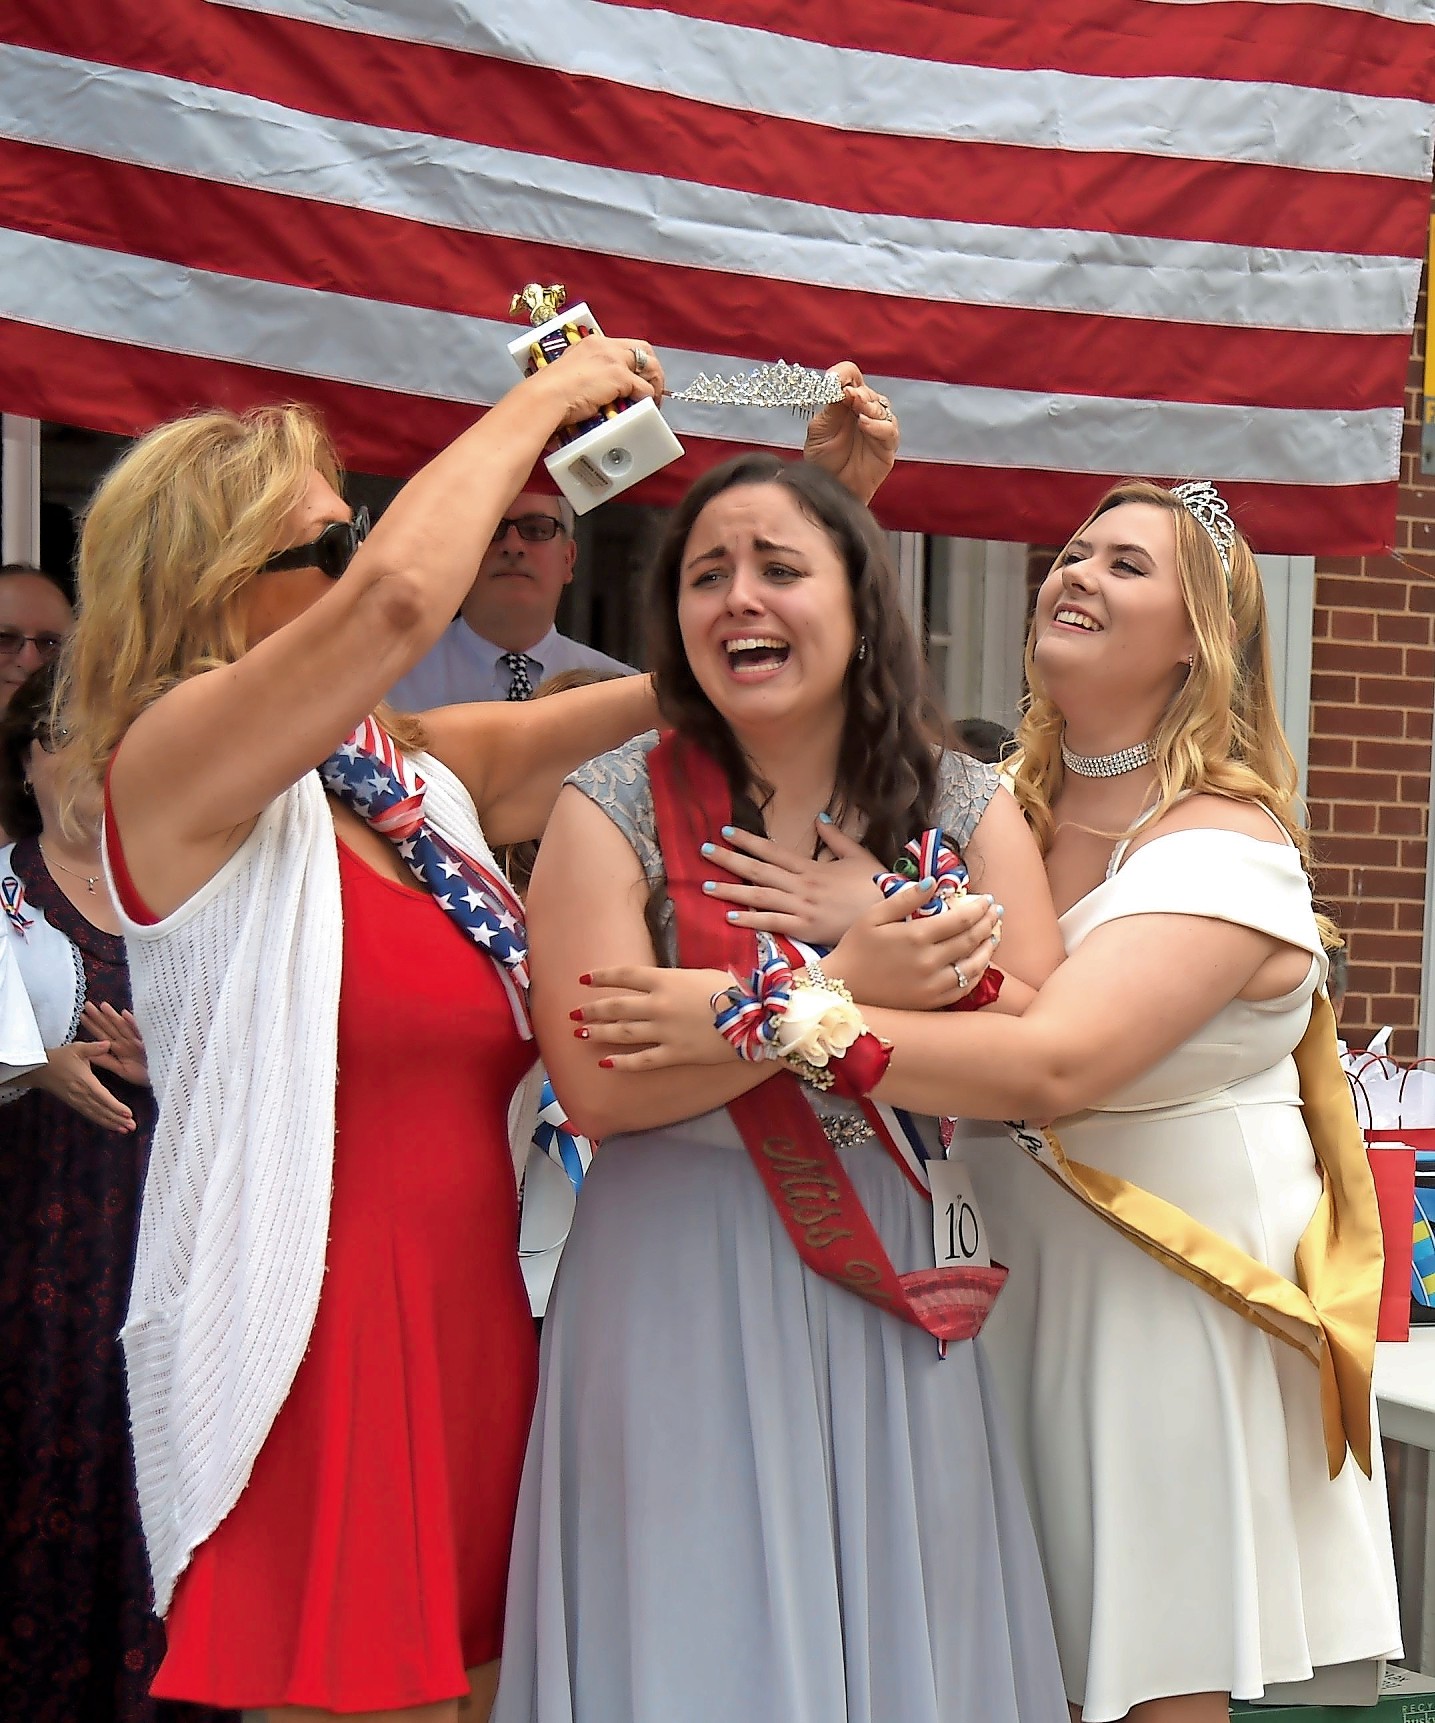 Samantha Walsh was crowned Miss Wantagh at Wantagh Elementary School on July 4. Former Miss Wantagh Emma Carey, right, and Director Ella Stevens embraced her.